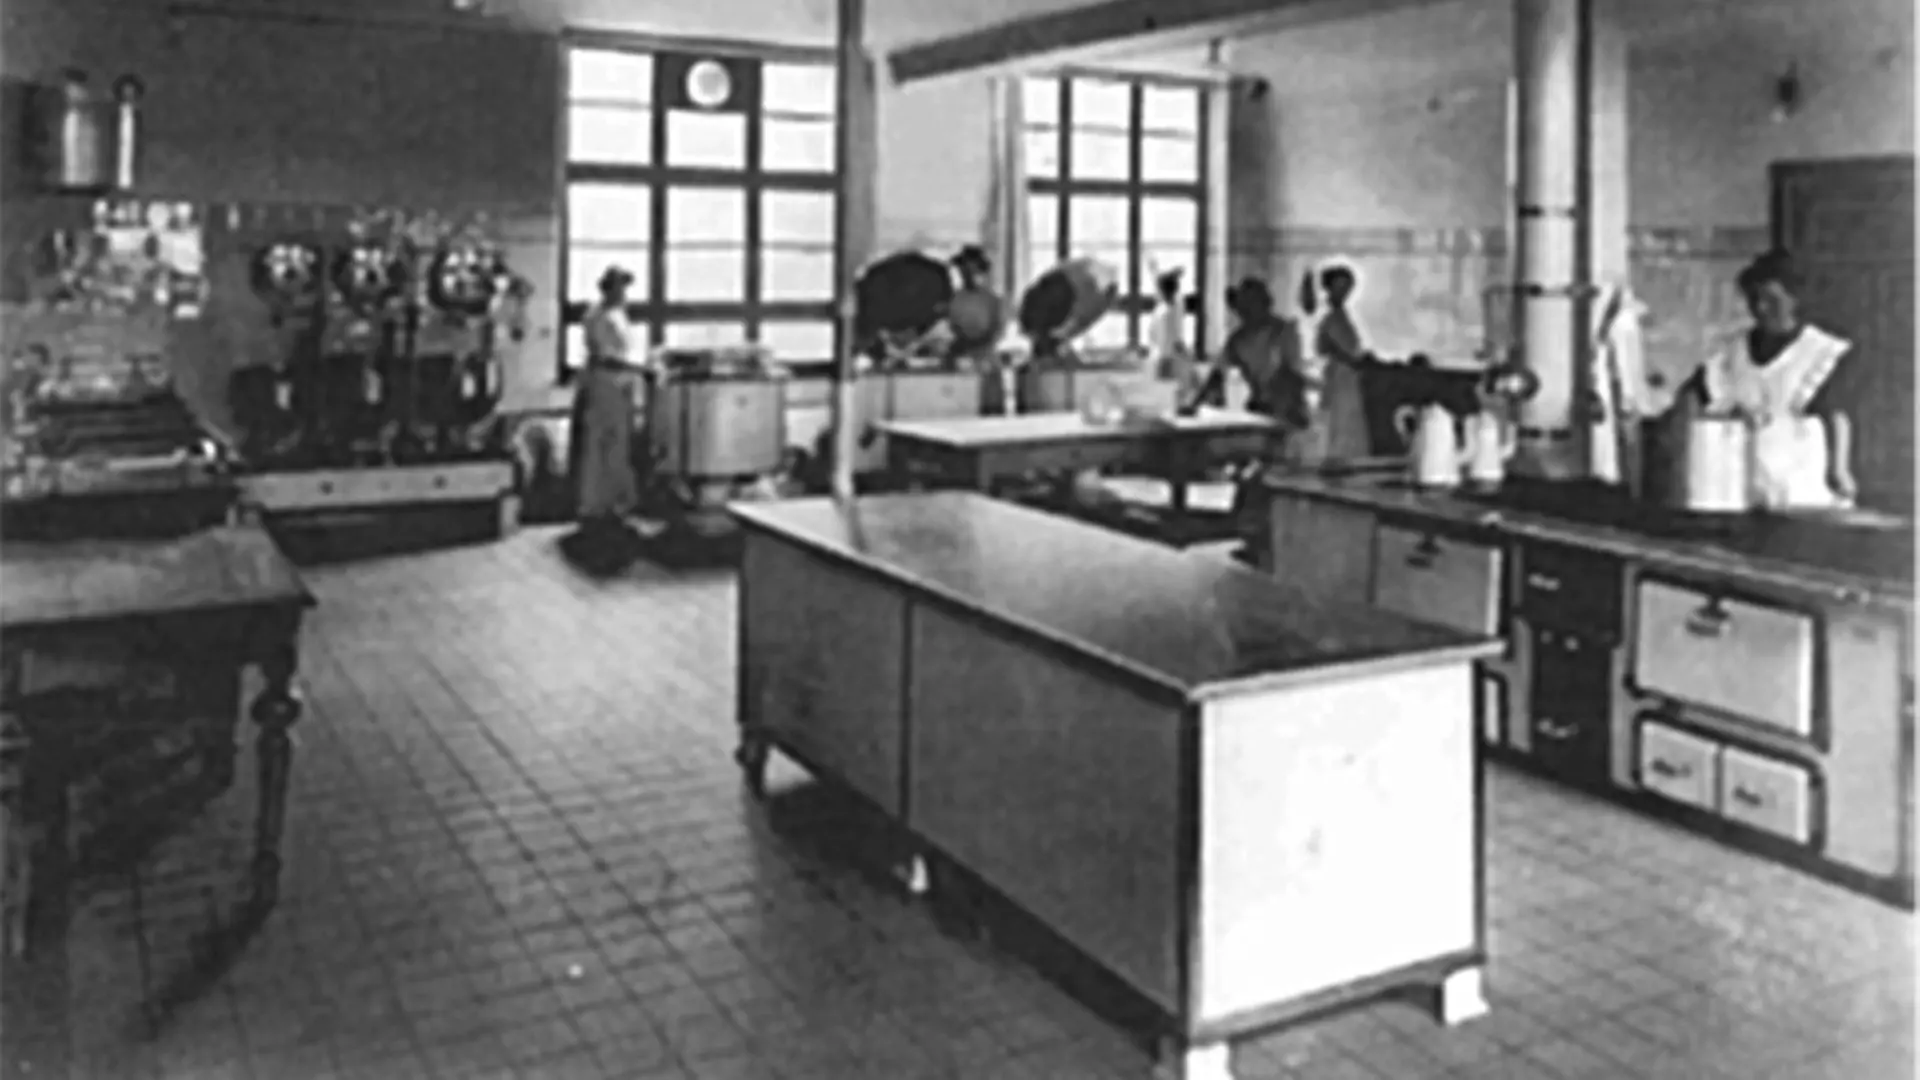 
In 1915, the first canteen kitchen was opened, equipped with the most modern fittings of the time.